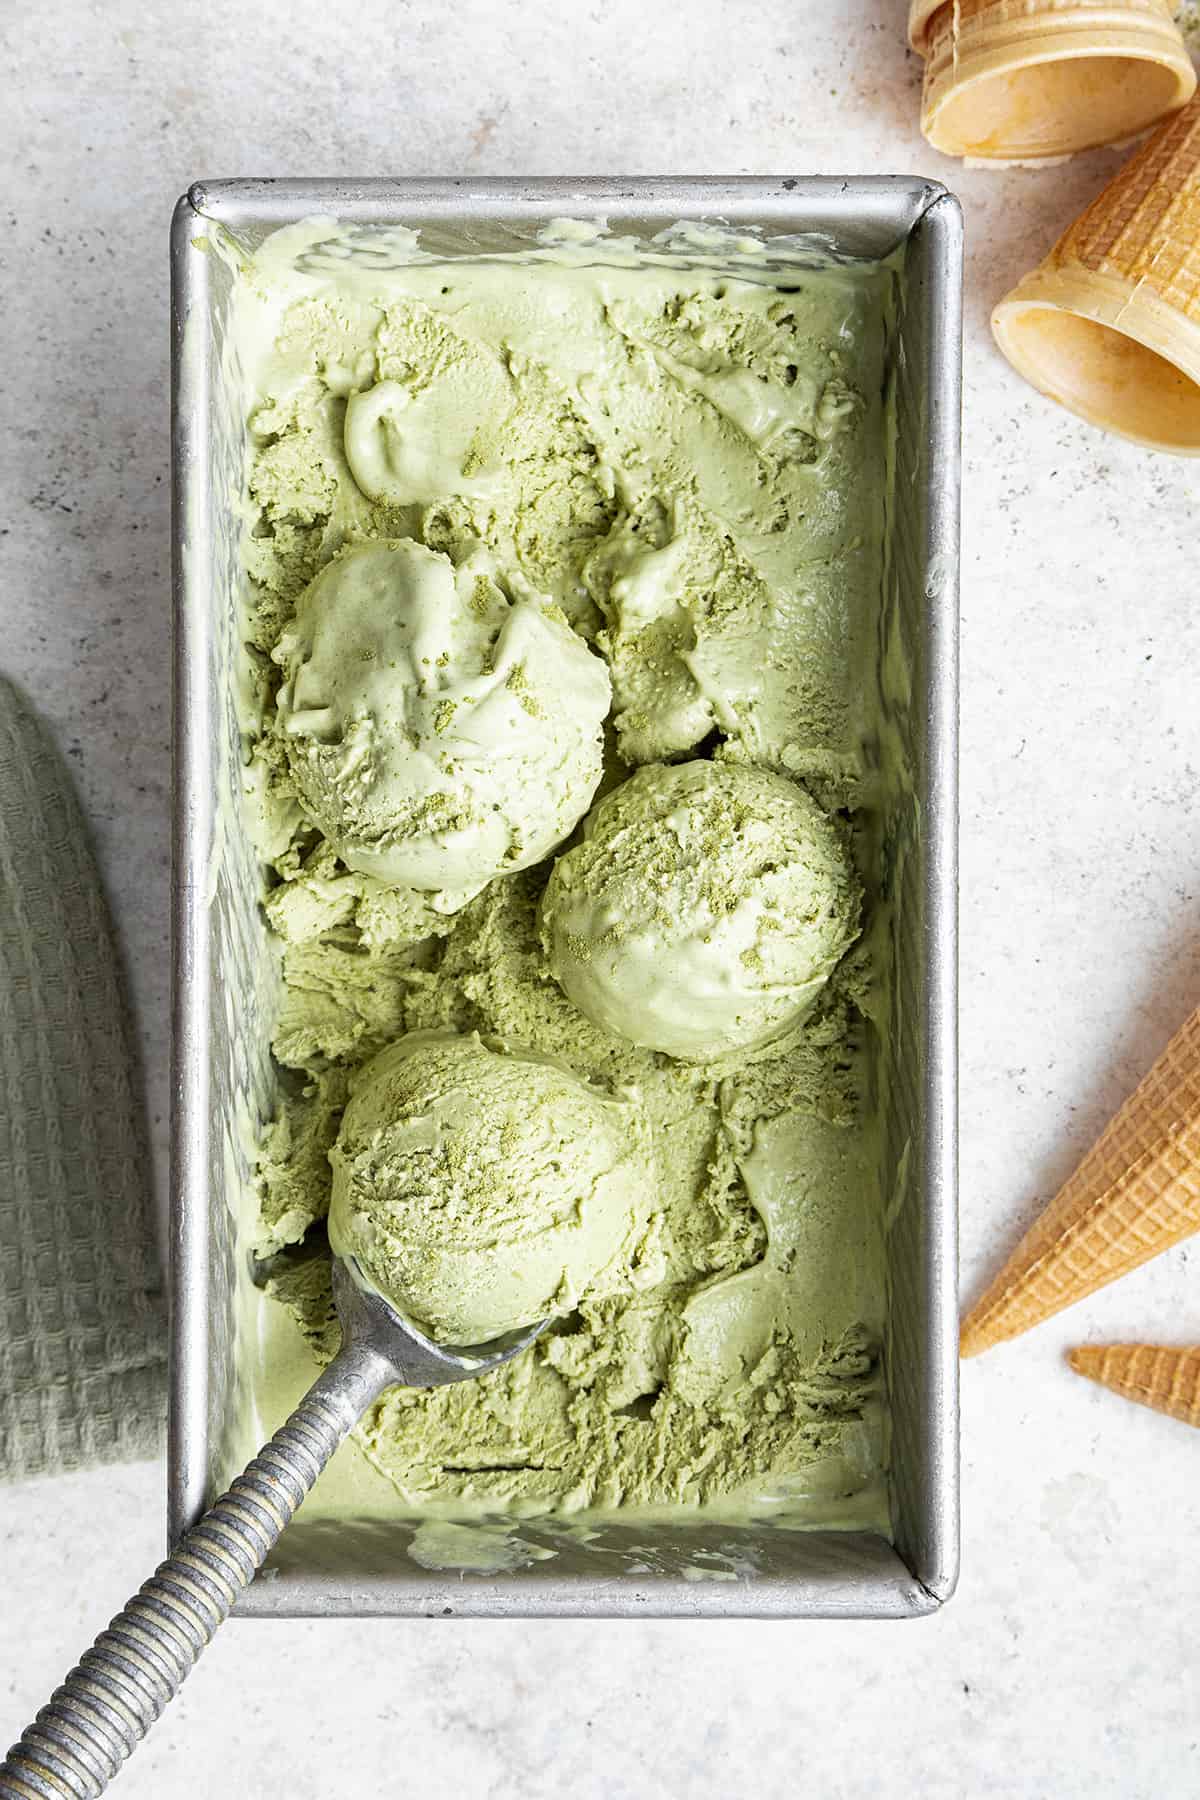 Overhead view of a loaf pan filled with matcha ice cream, with an ice cream scoop scooping a ball of ice cream